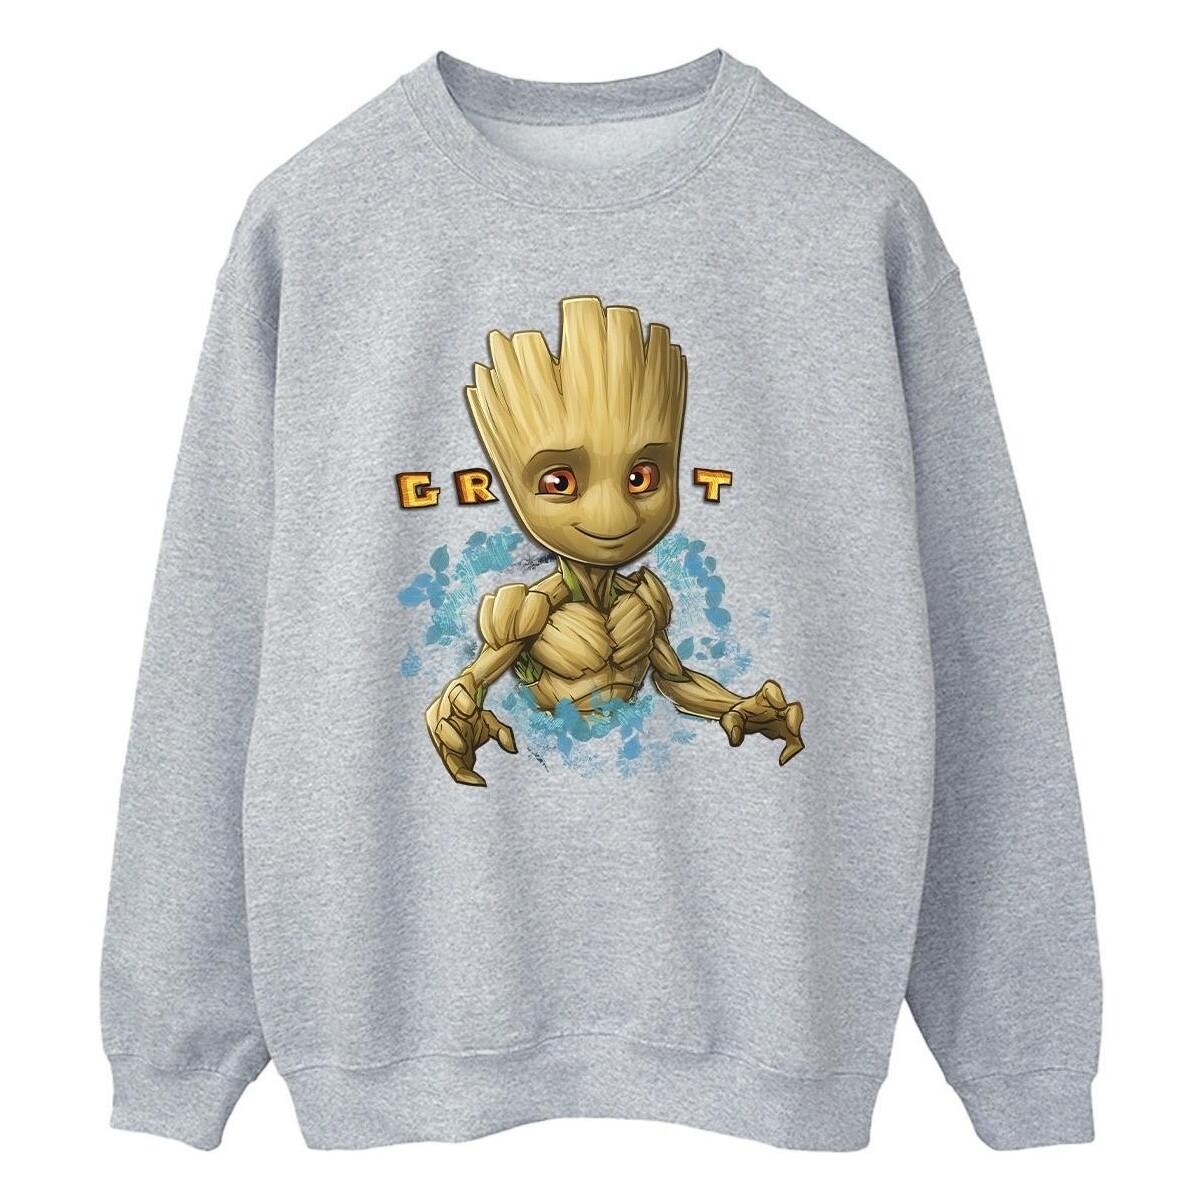 Vêtements Homme Sweats Guardians Of The Galaxy Groot Flowers Gris